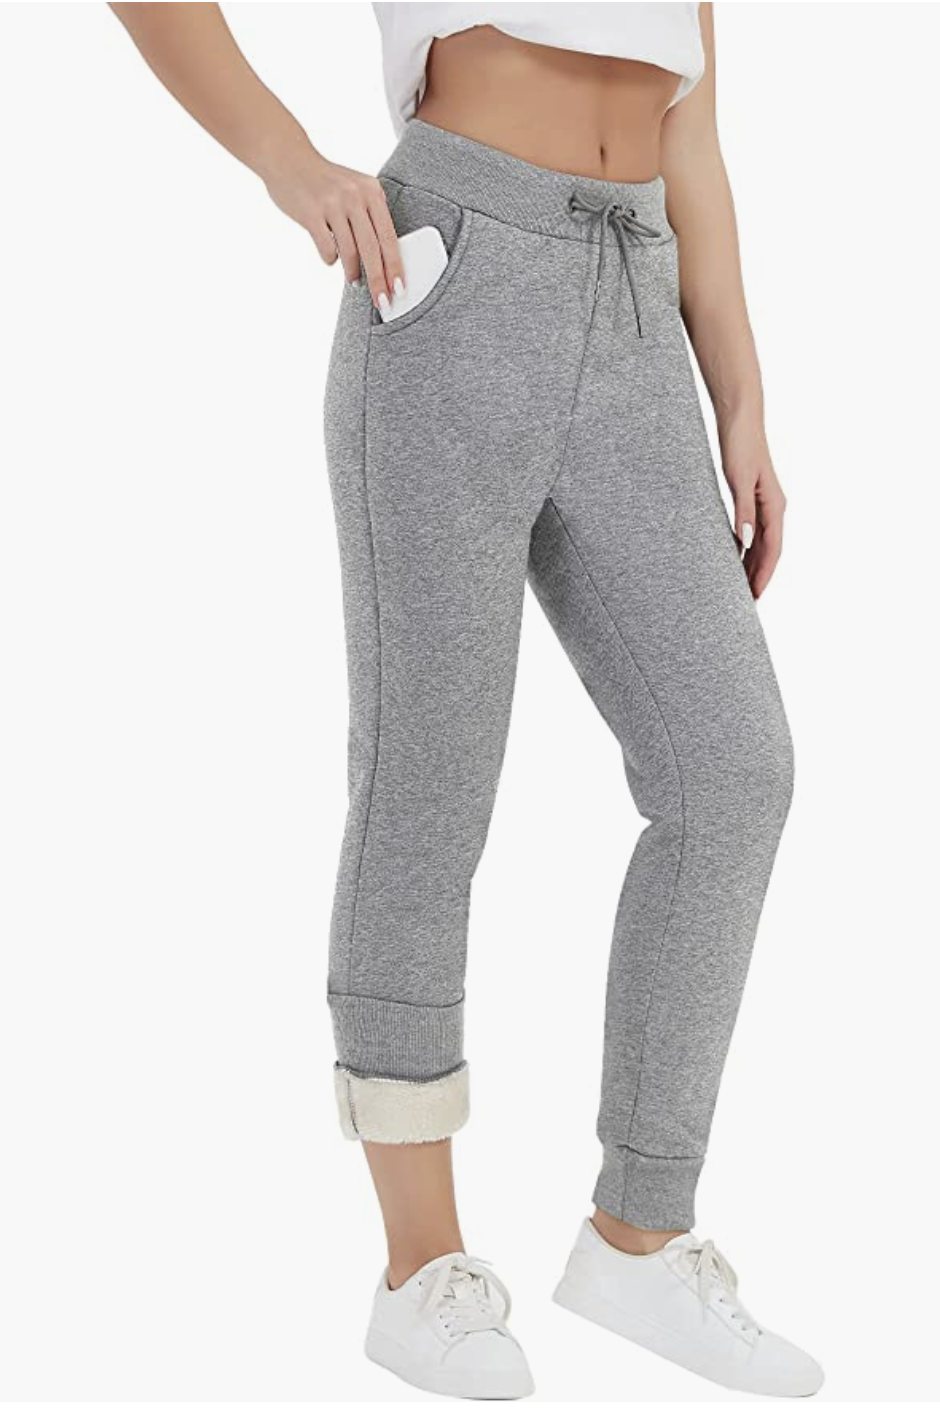 Womens Sherpa Fleece Lined Sweatpants Winter Thick Athletic Cashmere Jogger  Pant